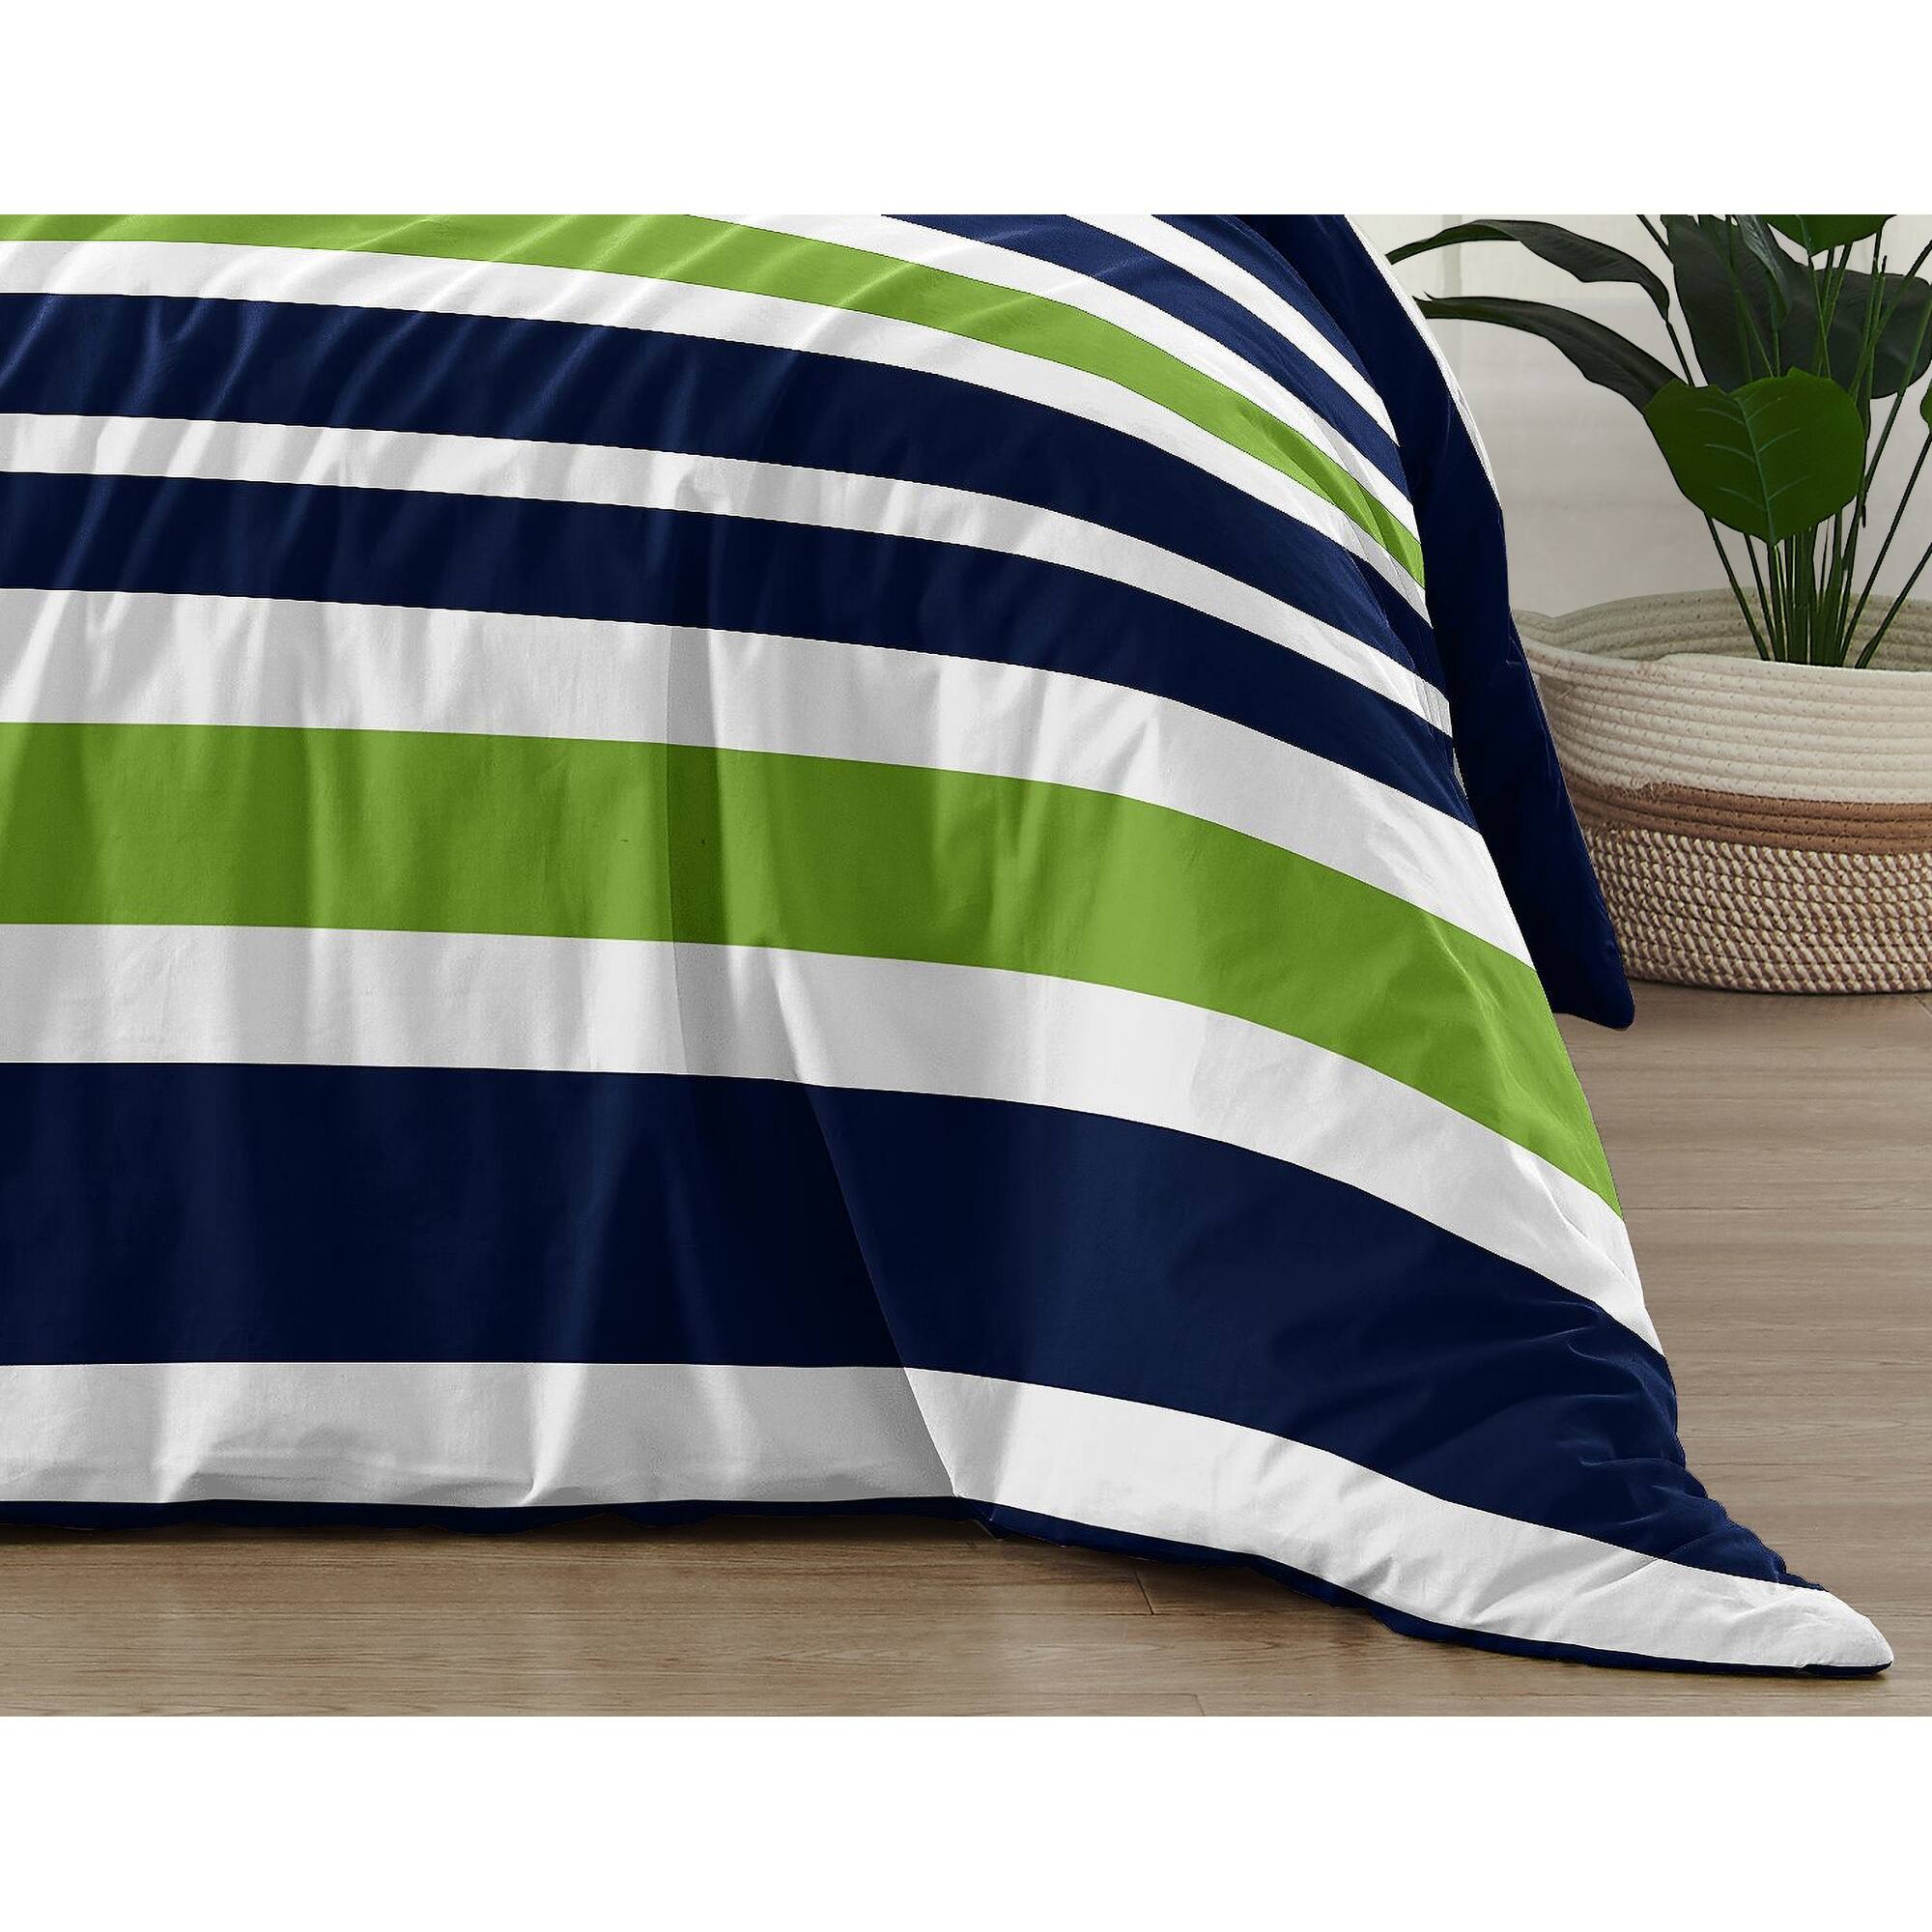 Navy and Lime Green on White Stripe Full/Queen 3-piece Comforter Set